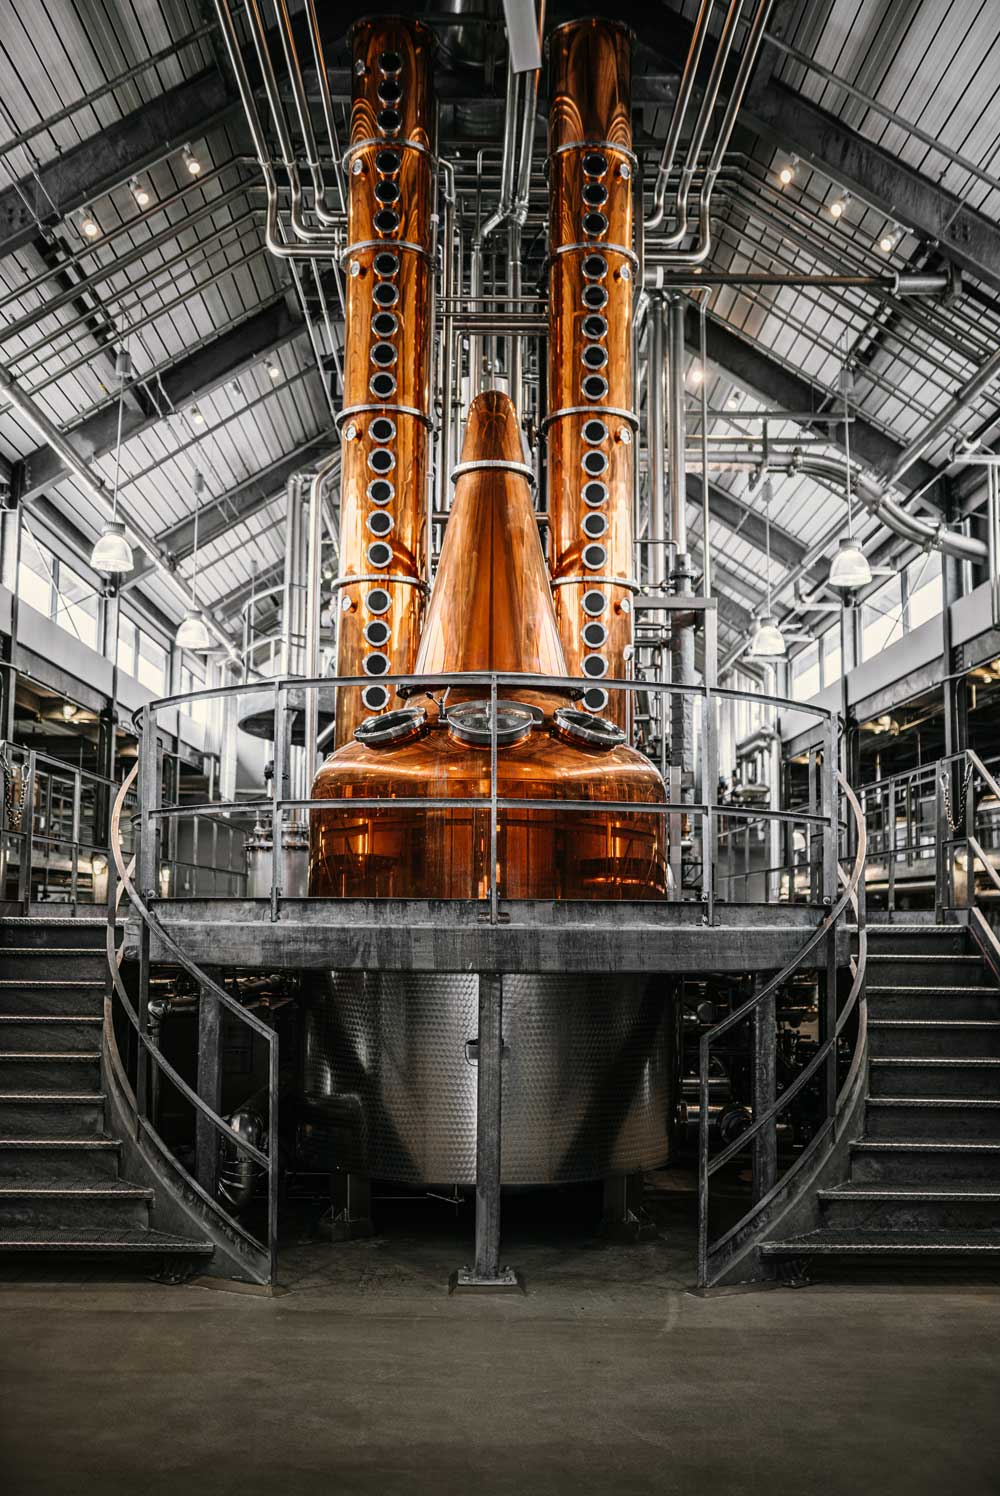 The carl stil at the Bently Heritage Distillery